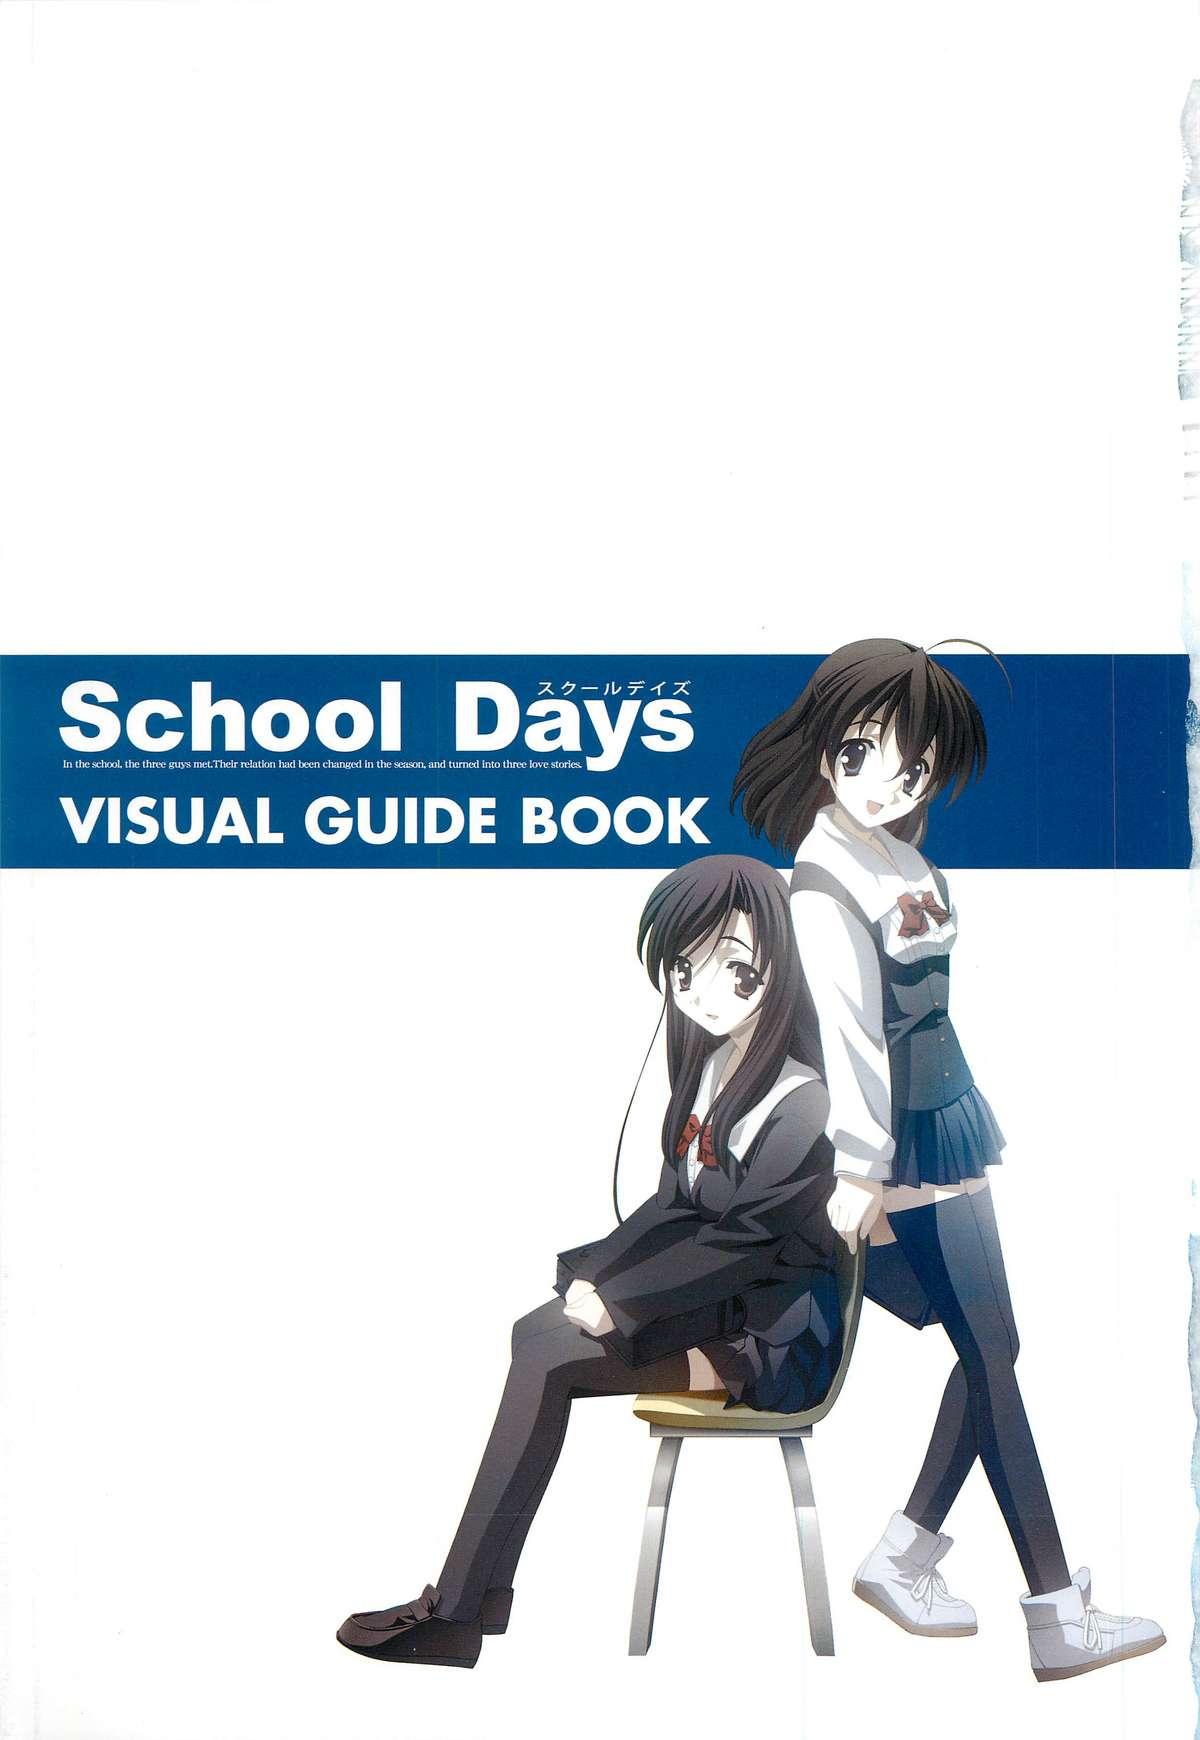 Wild School Days Visual Guide Book - School days Bokep - Page 3